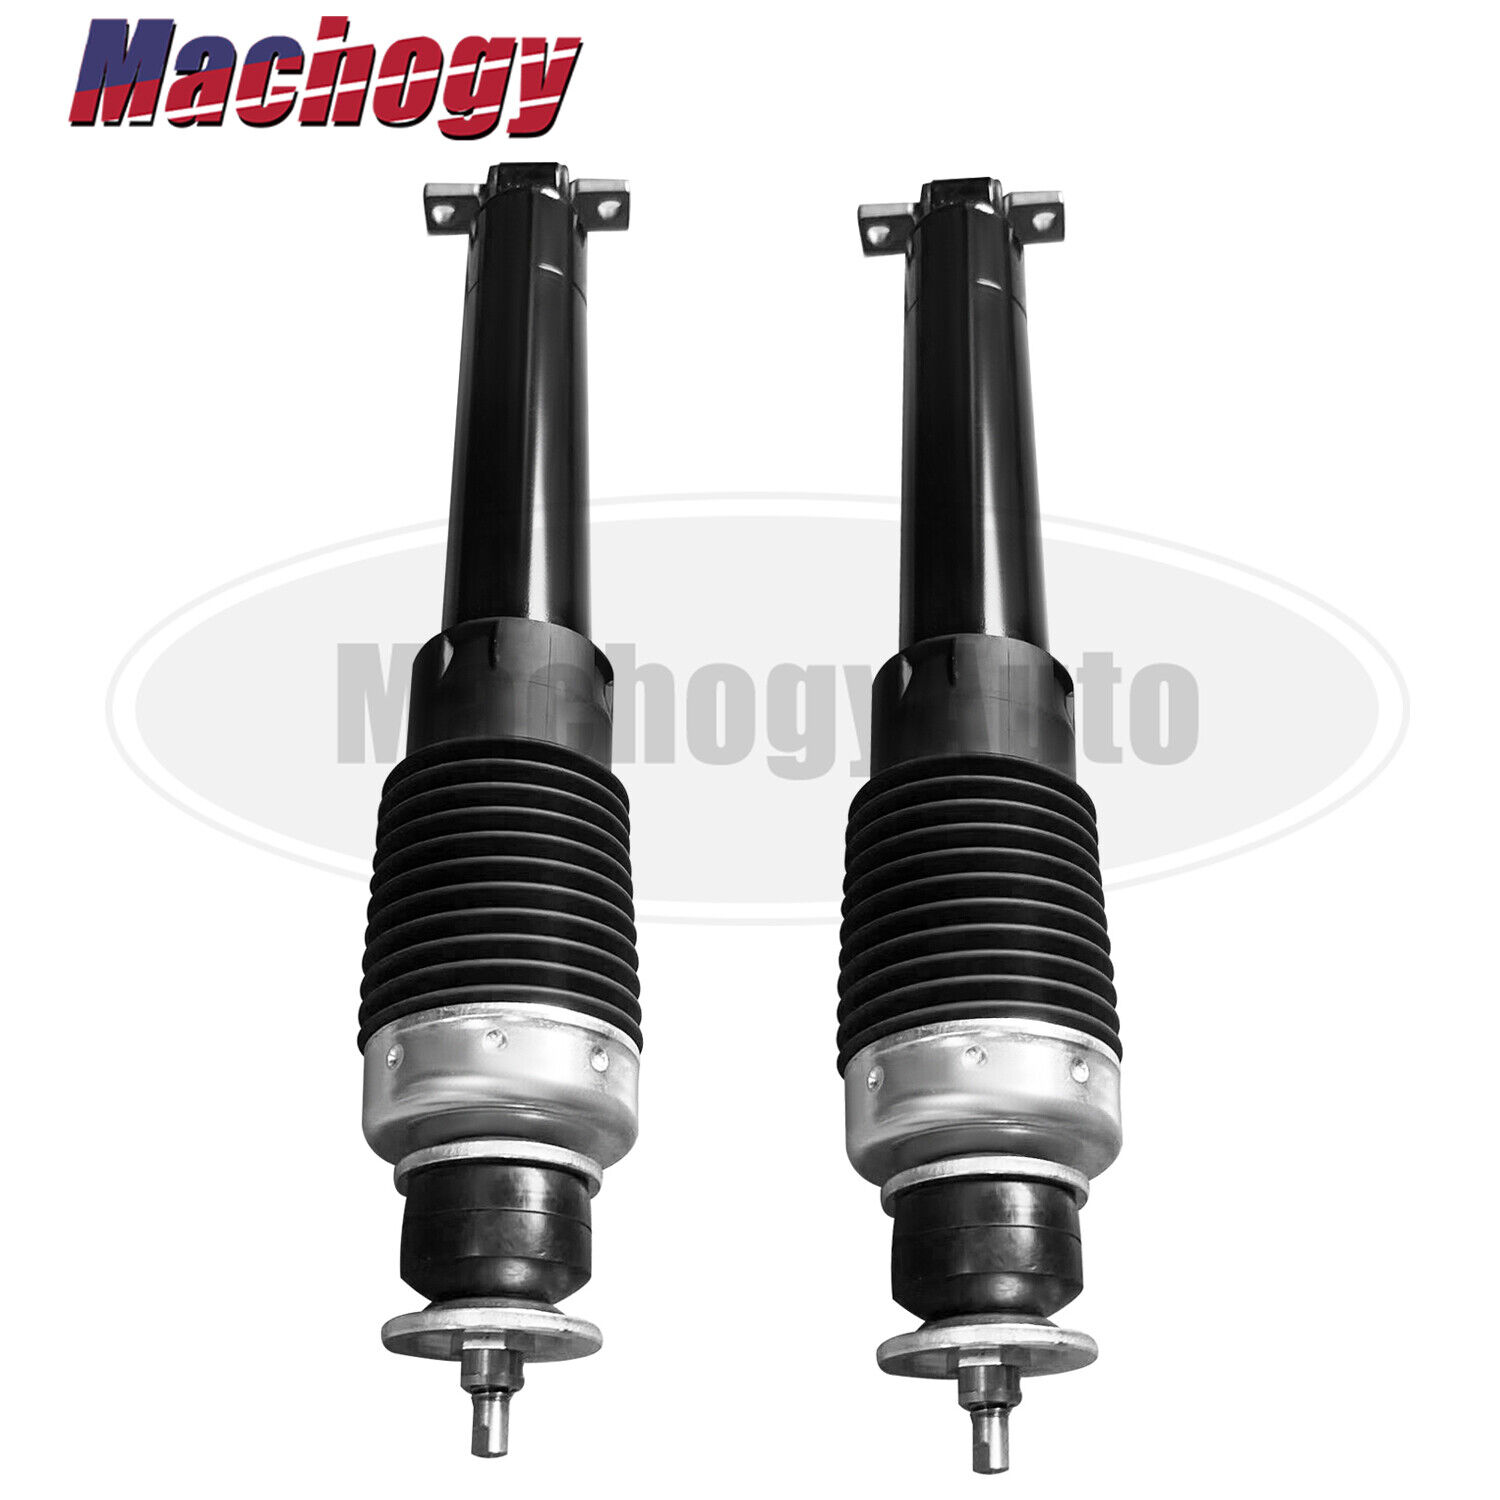 2X Front Shock Absorbers w/Magnetic For Corvette C5 C6 03-13 Cadillac XLR 04-09